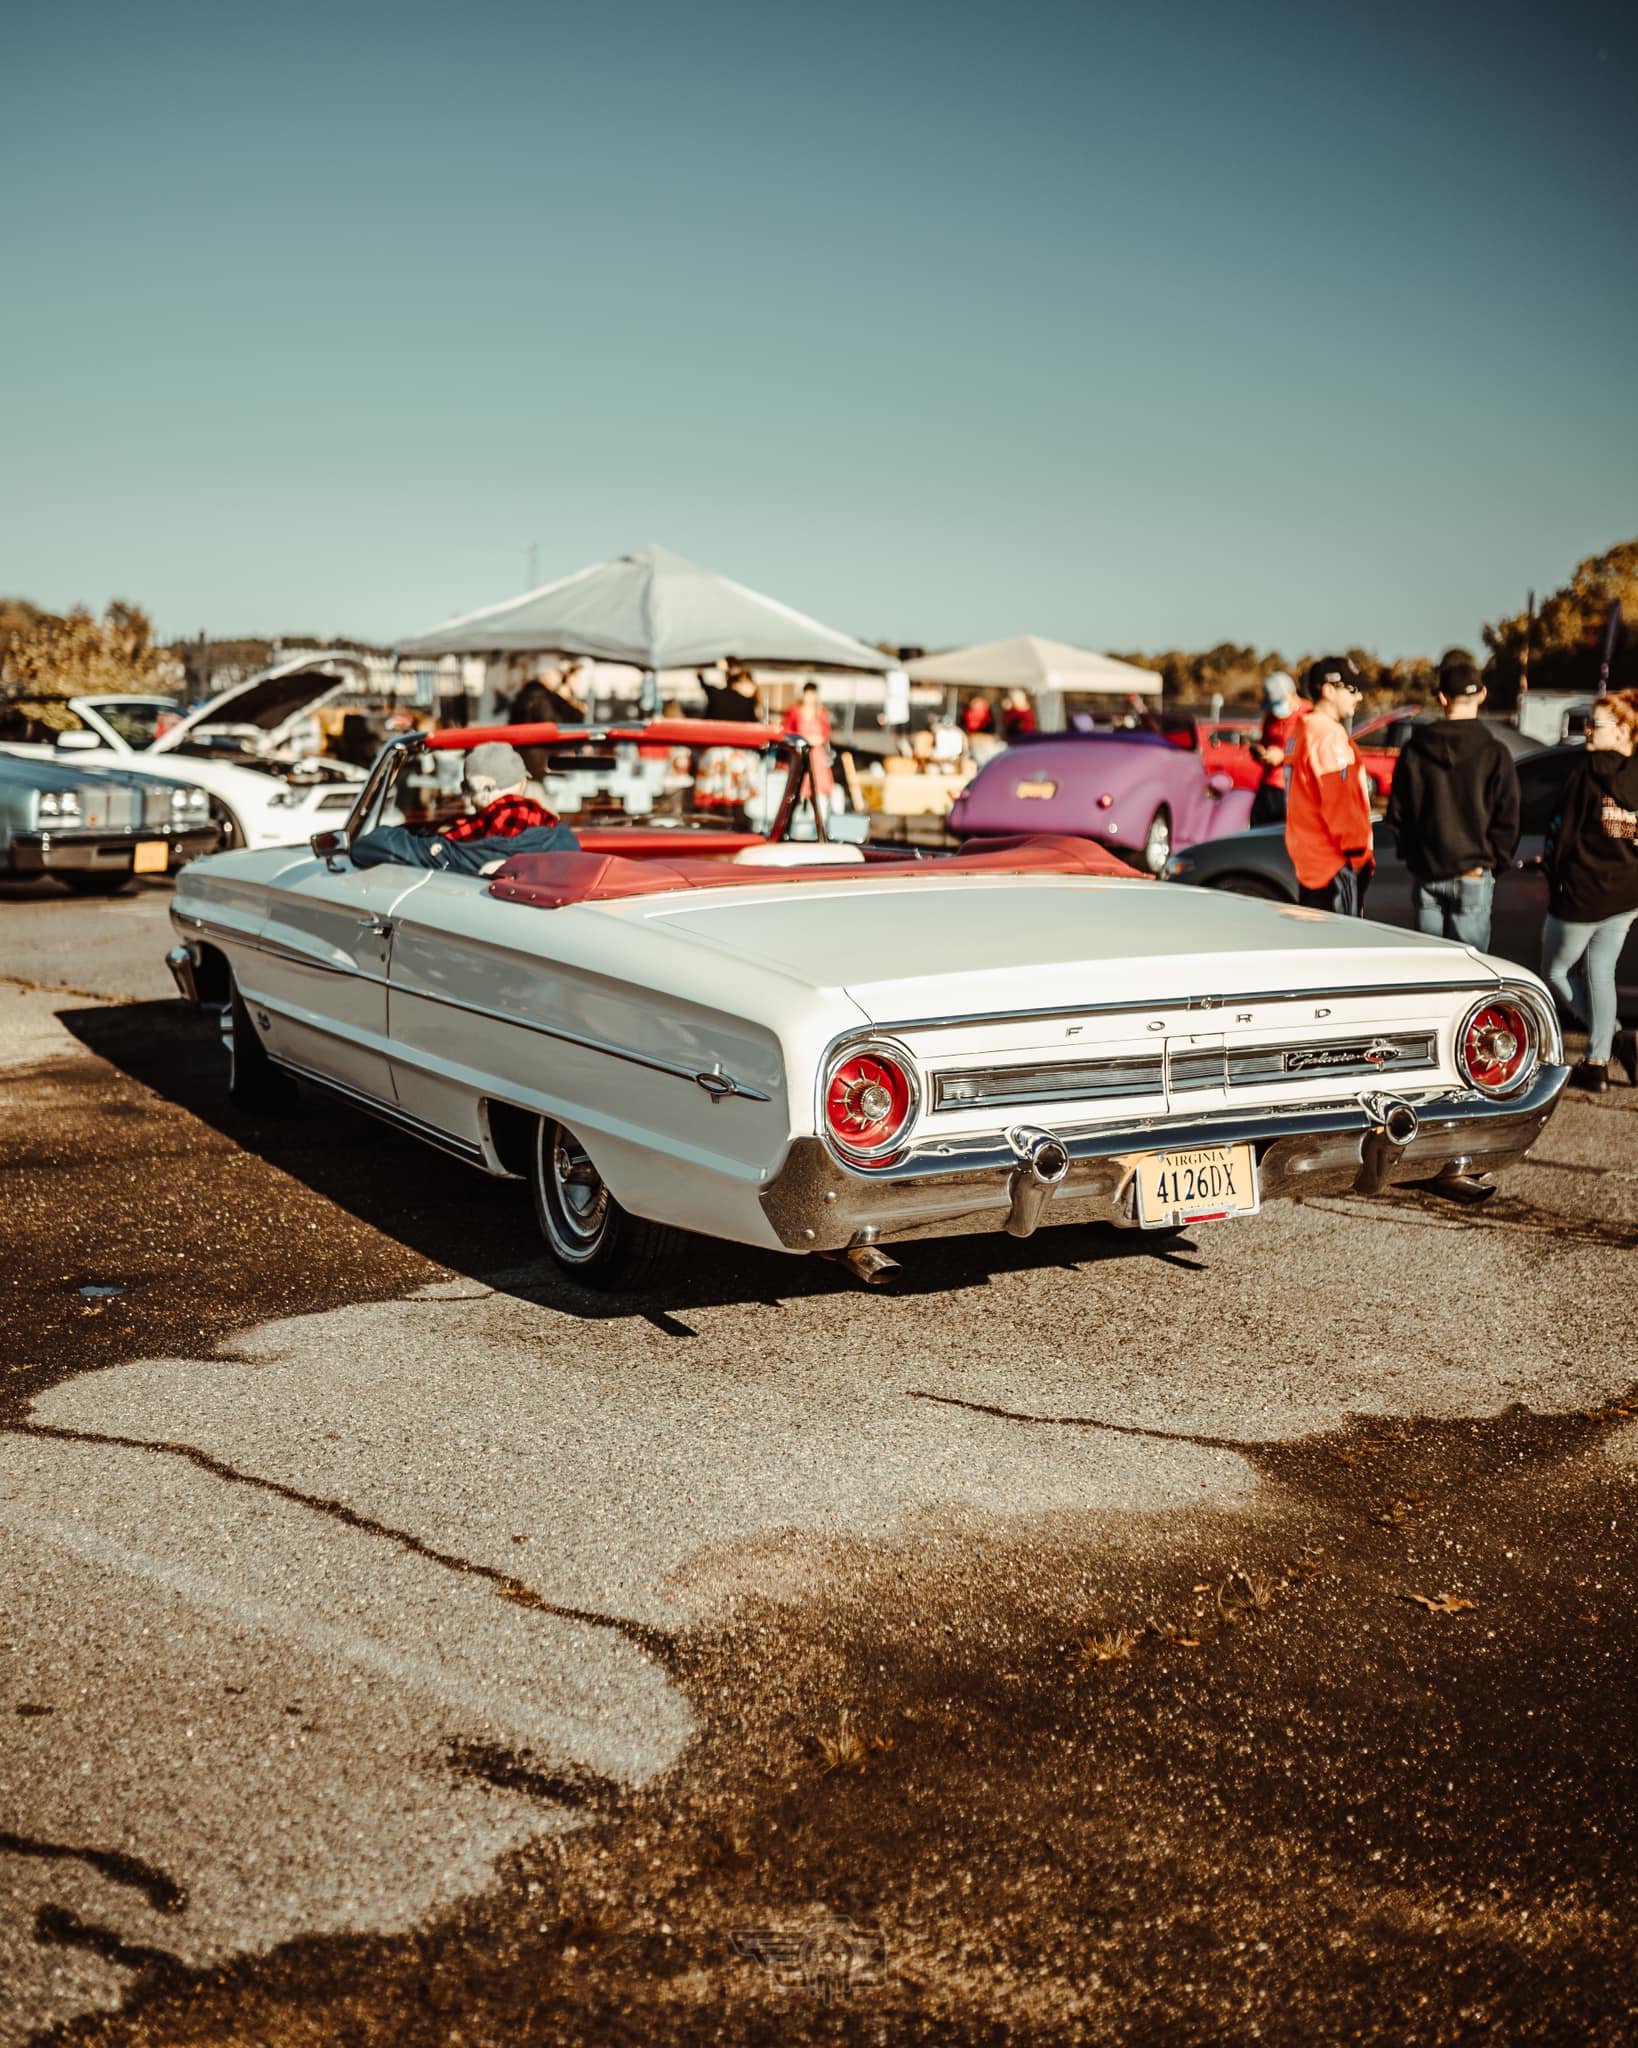 5th Annual 65 Roses Car Show benefiting Cystic Fibrosis